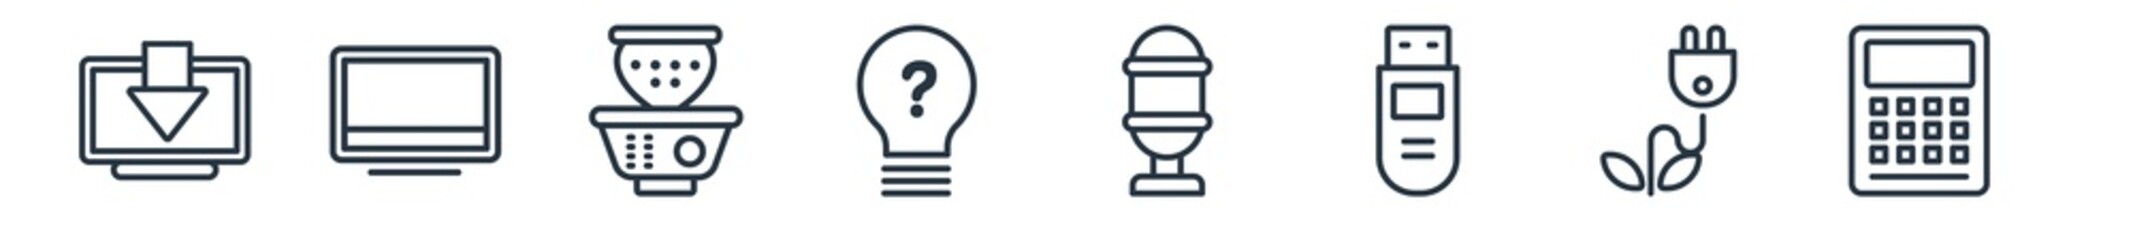 linear set of technology outline icons. line vector icons such as receive, big tv, fryer, light bulb idea, retro microphone, calculations vector illustration.